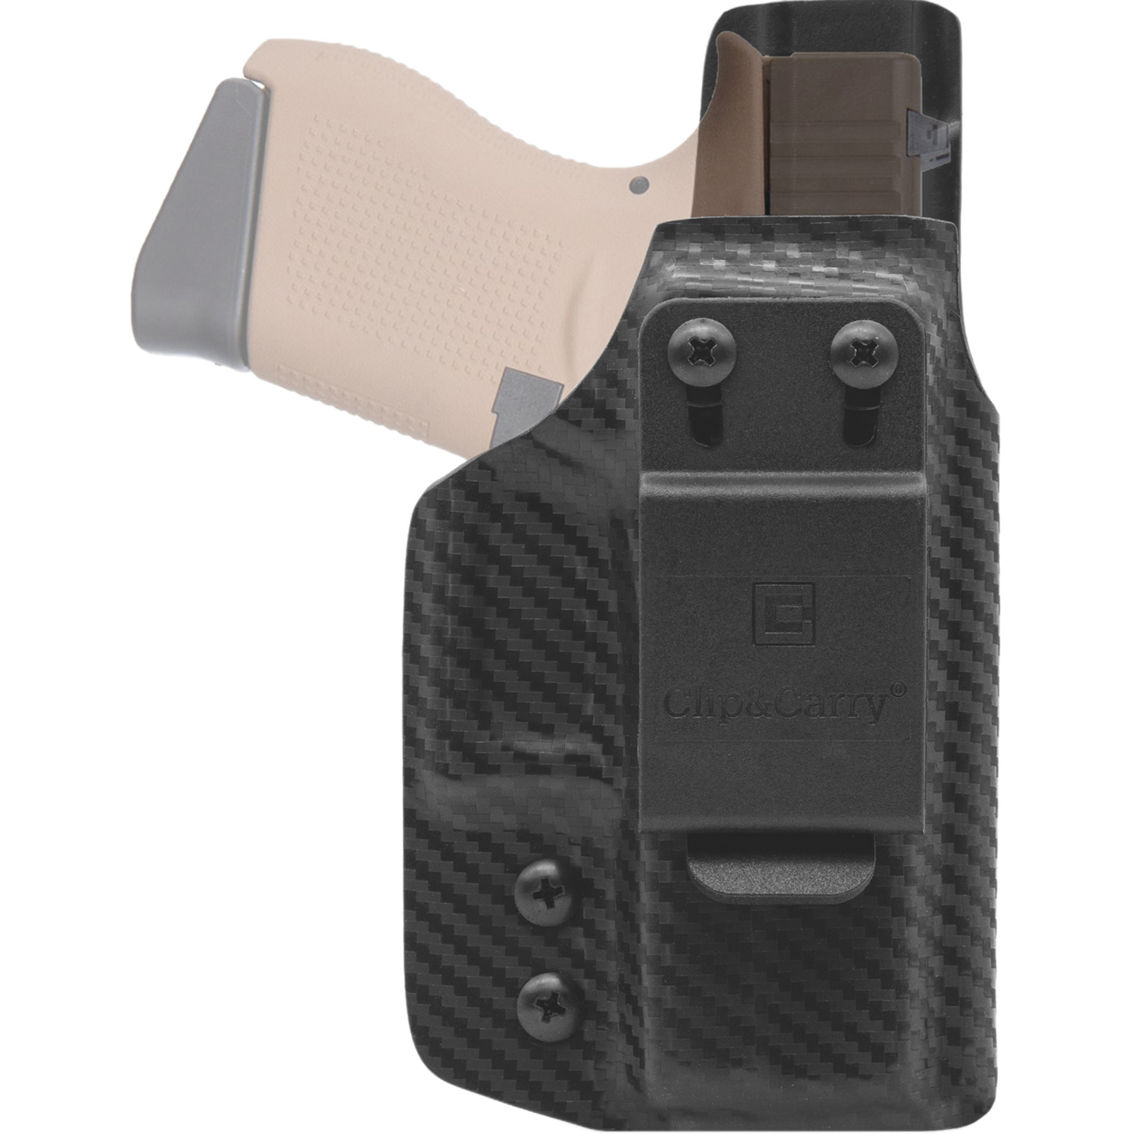 Clip & Carry IWB Kydex Holster Glock 43, 43X and MOS - Image 2 of 4